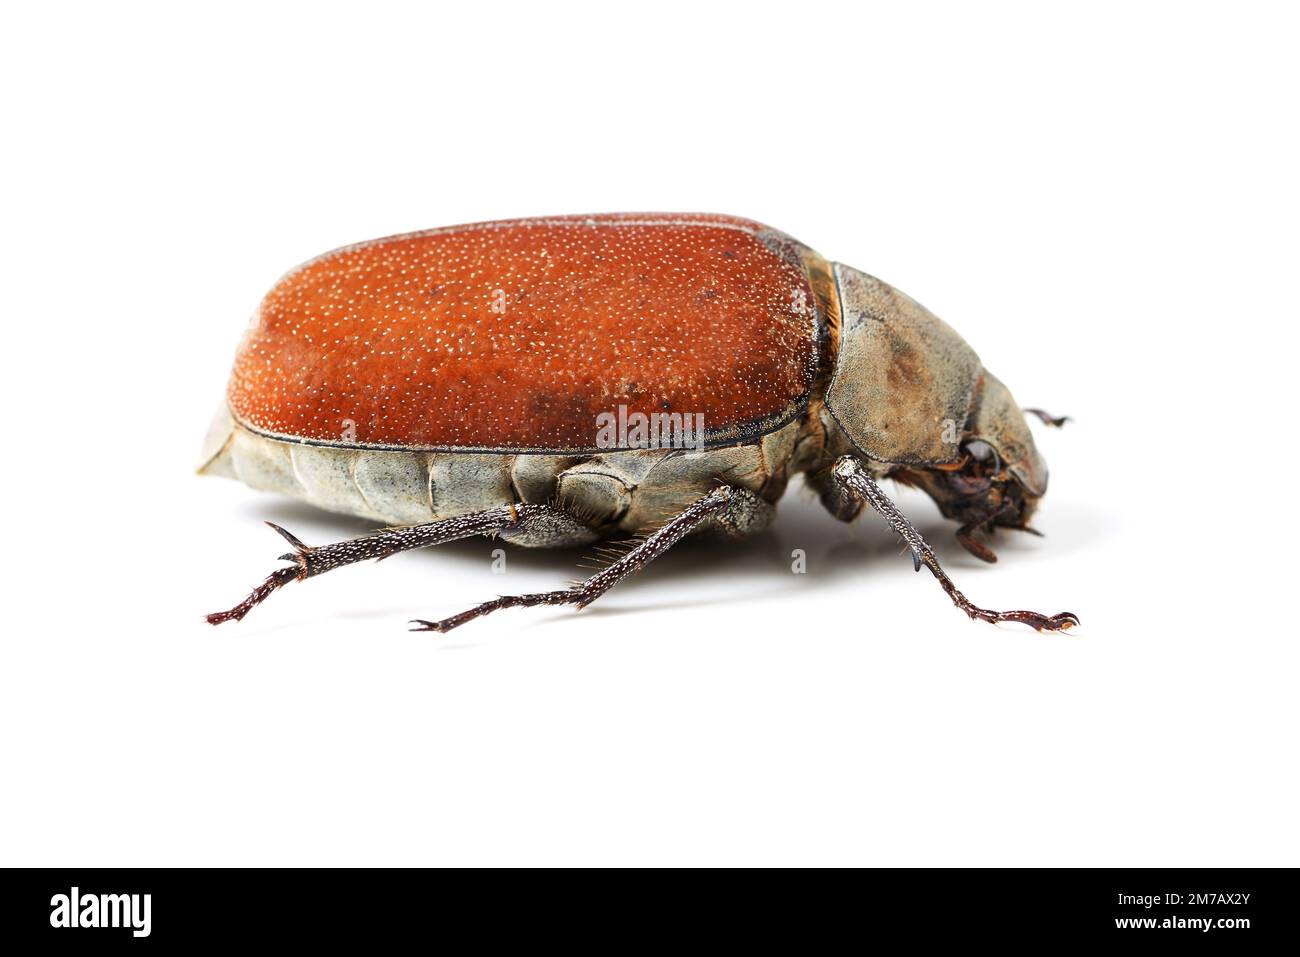 The beauty of beetles. Macro shot of a red and brown beetle isolated on white. Stock Photo